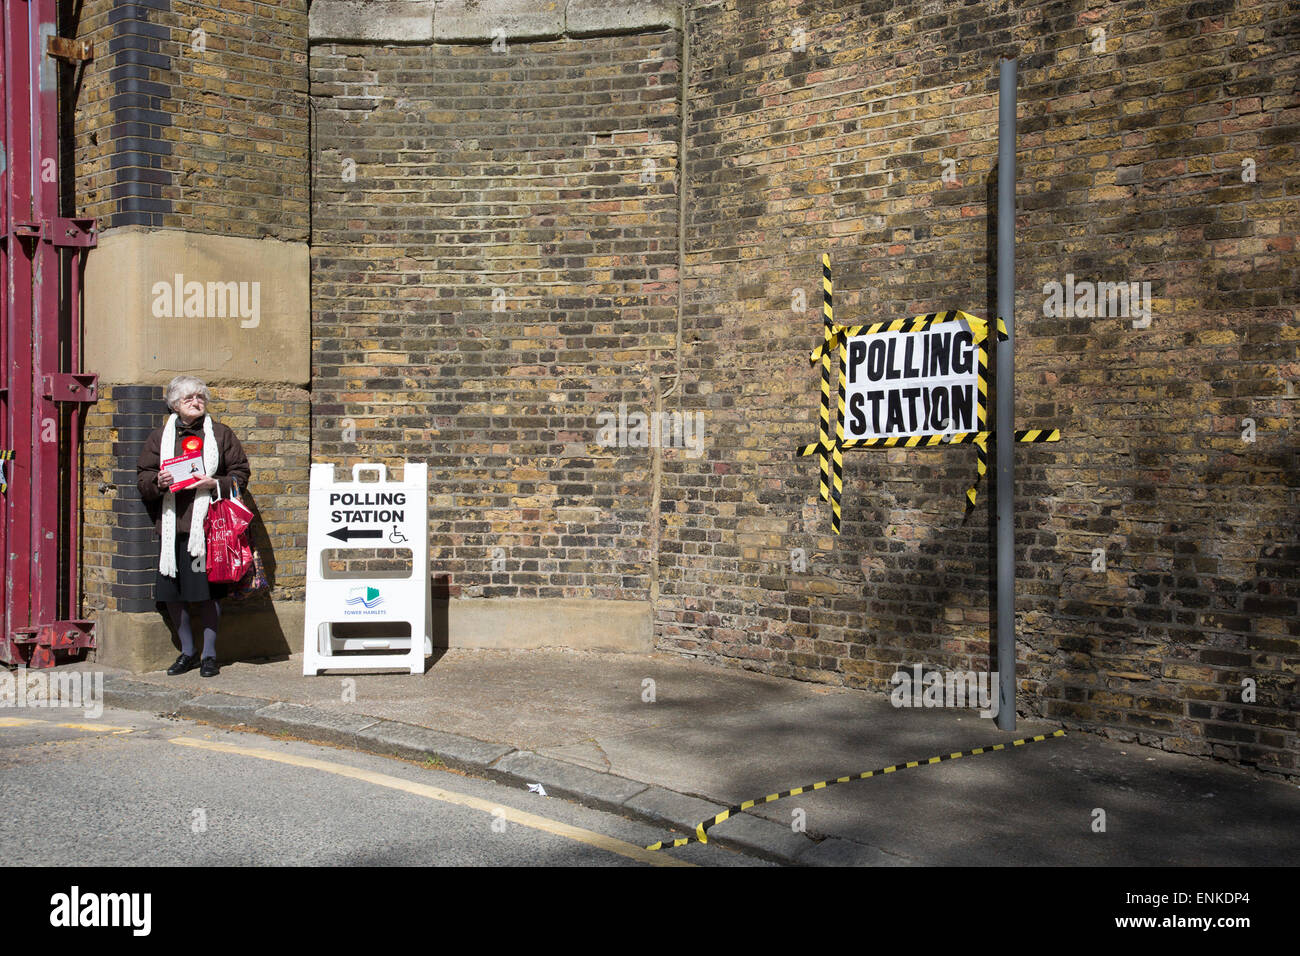 London, UK. Thursday 7th May 2015. Voters attending a polling station at John Orwell Leisure Centre in the constituency of  Poplar and Limehouse in East London on the day of the general election. This is a Labour Party seat, although this electin is set to be one of the most hotly contested in a generation. Stock Photo